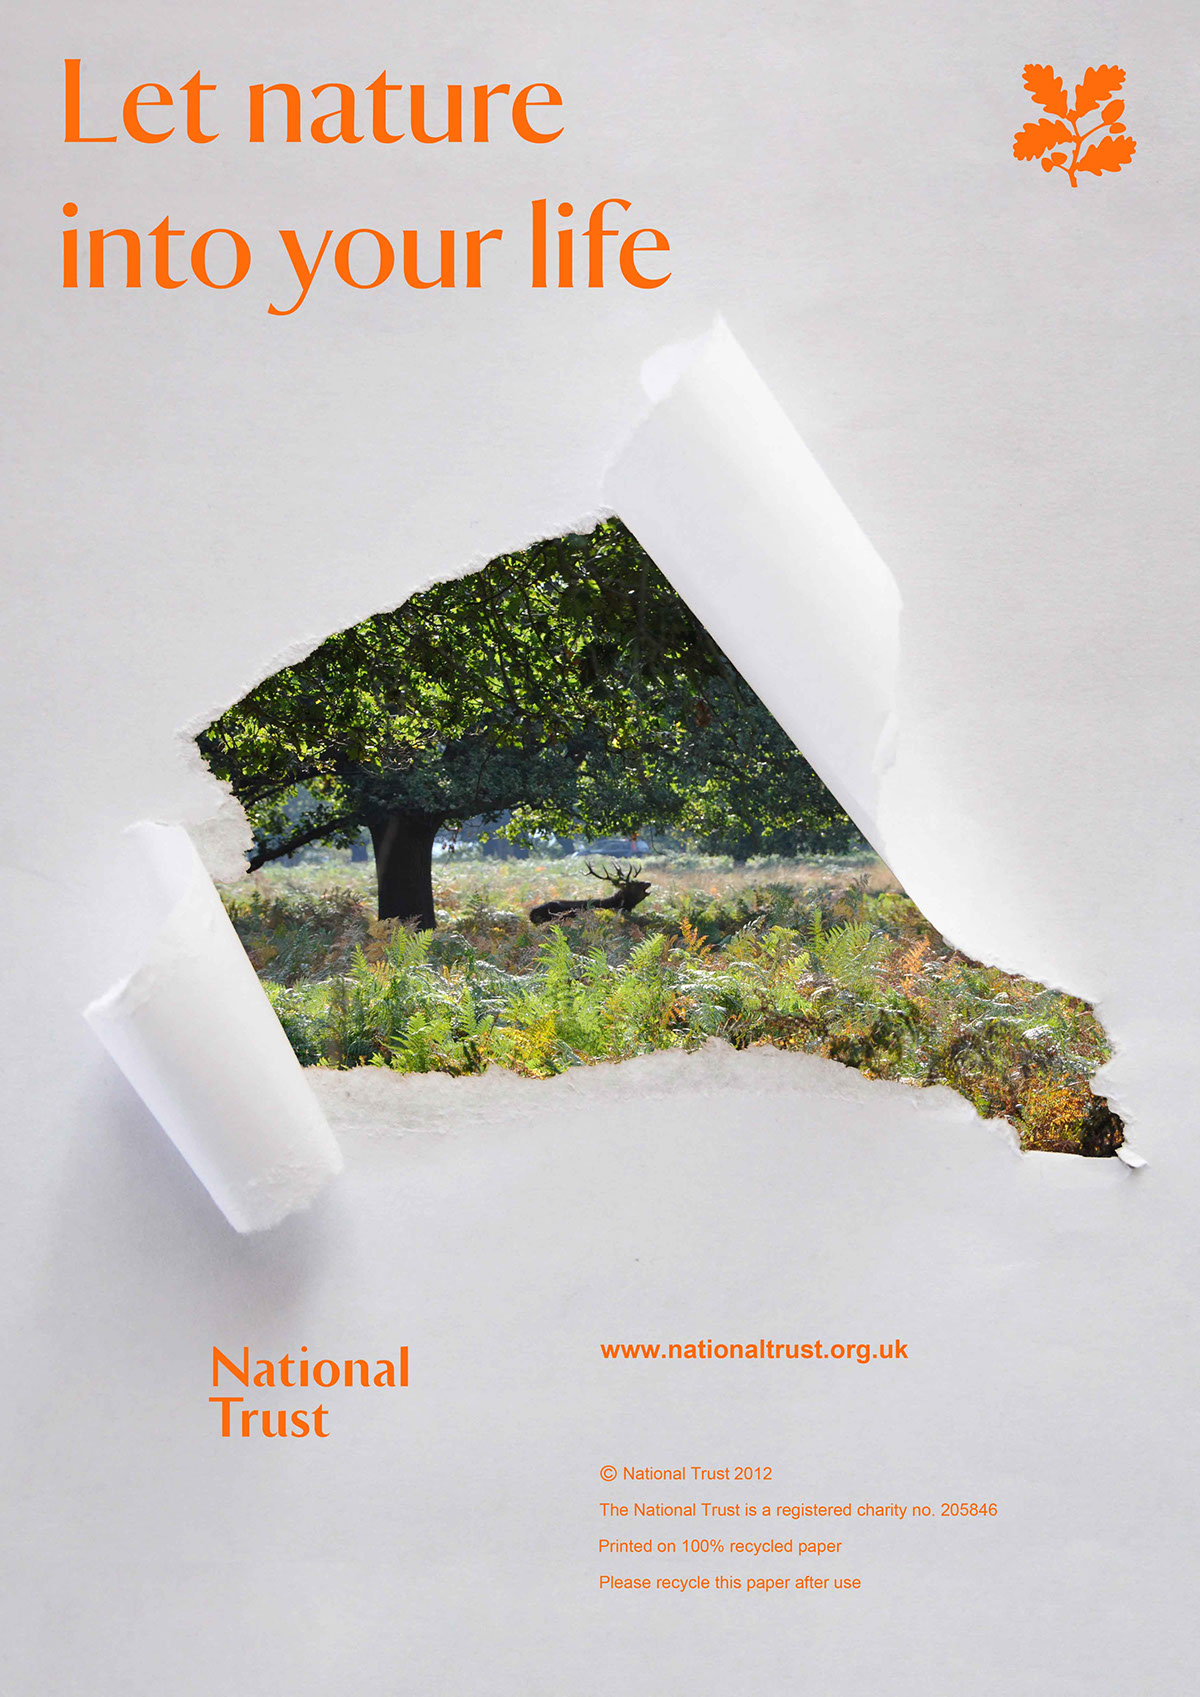 National Trust Nature Let Nature Into life tear